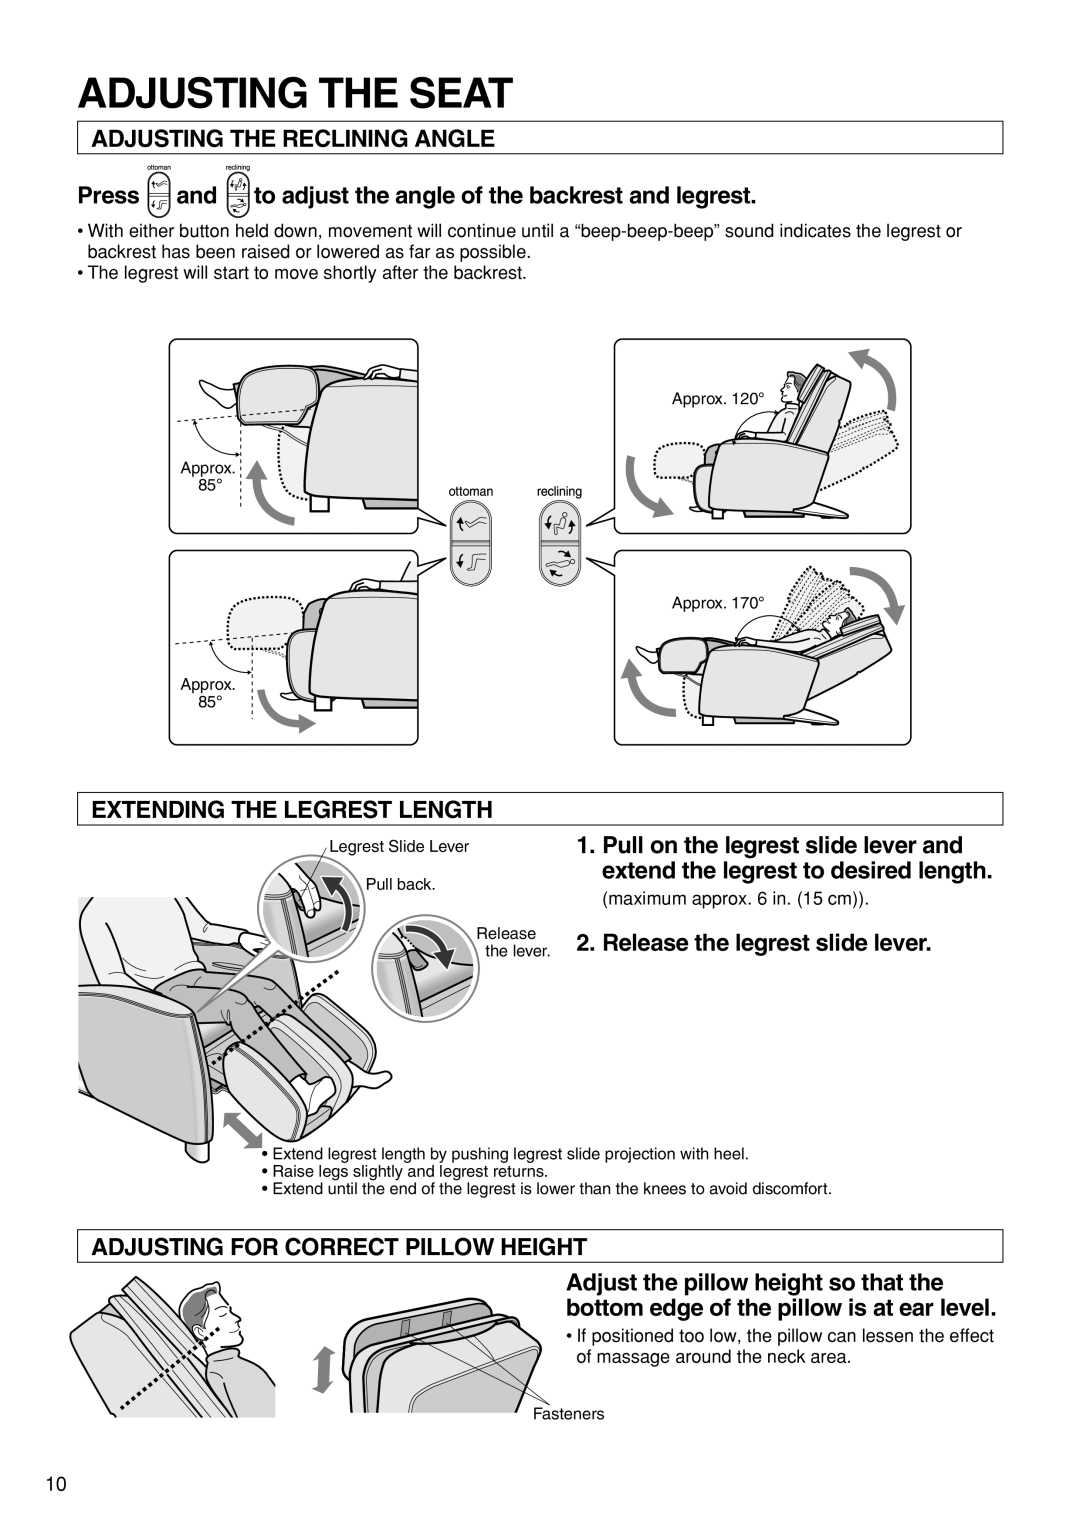 Panasonic EP1273 operating instructions Adjusting The Seat, Adjusting The Reclining Angle, Extending The Legrest Length 